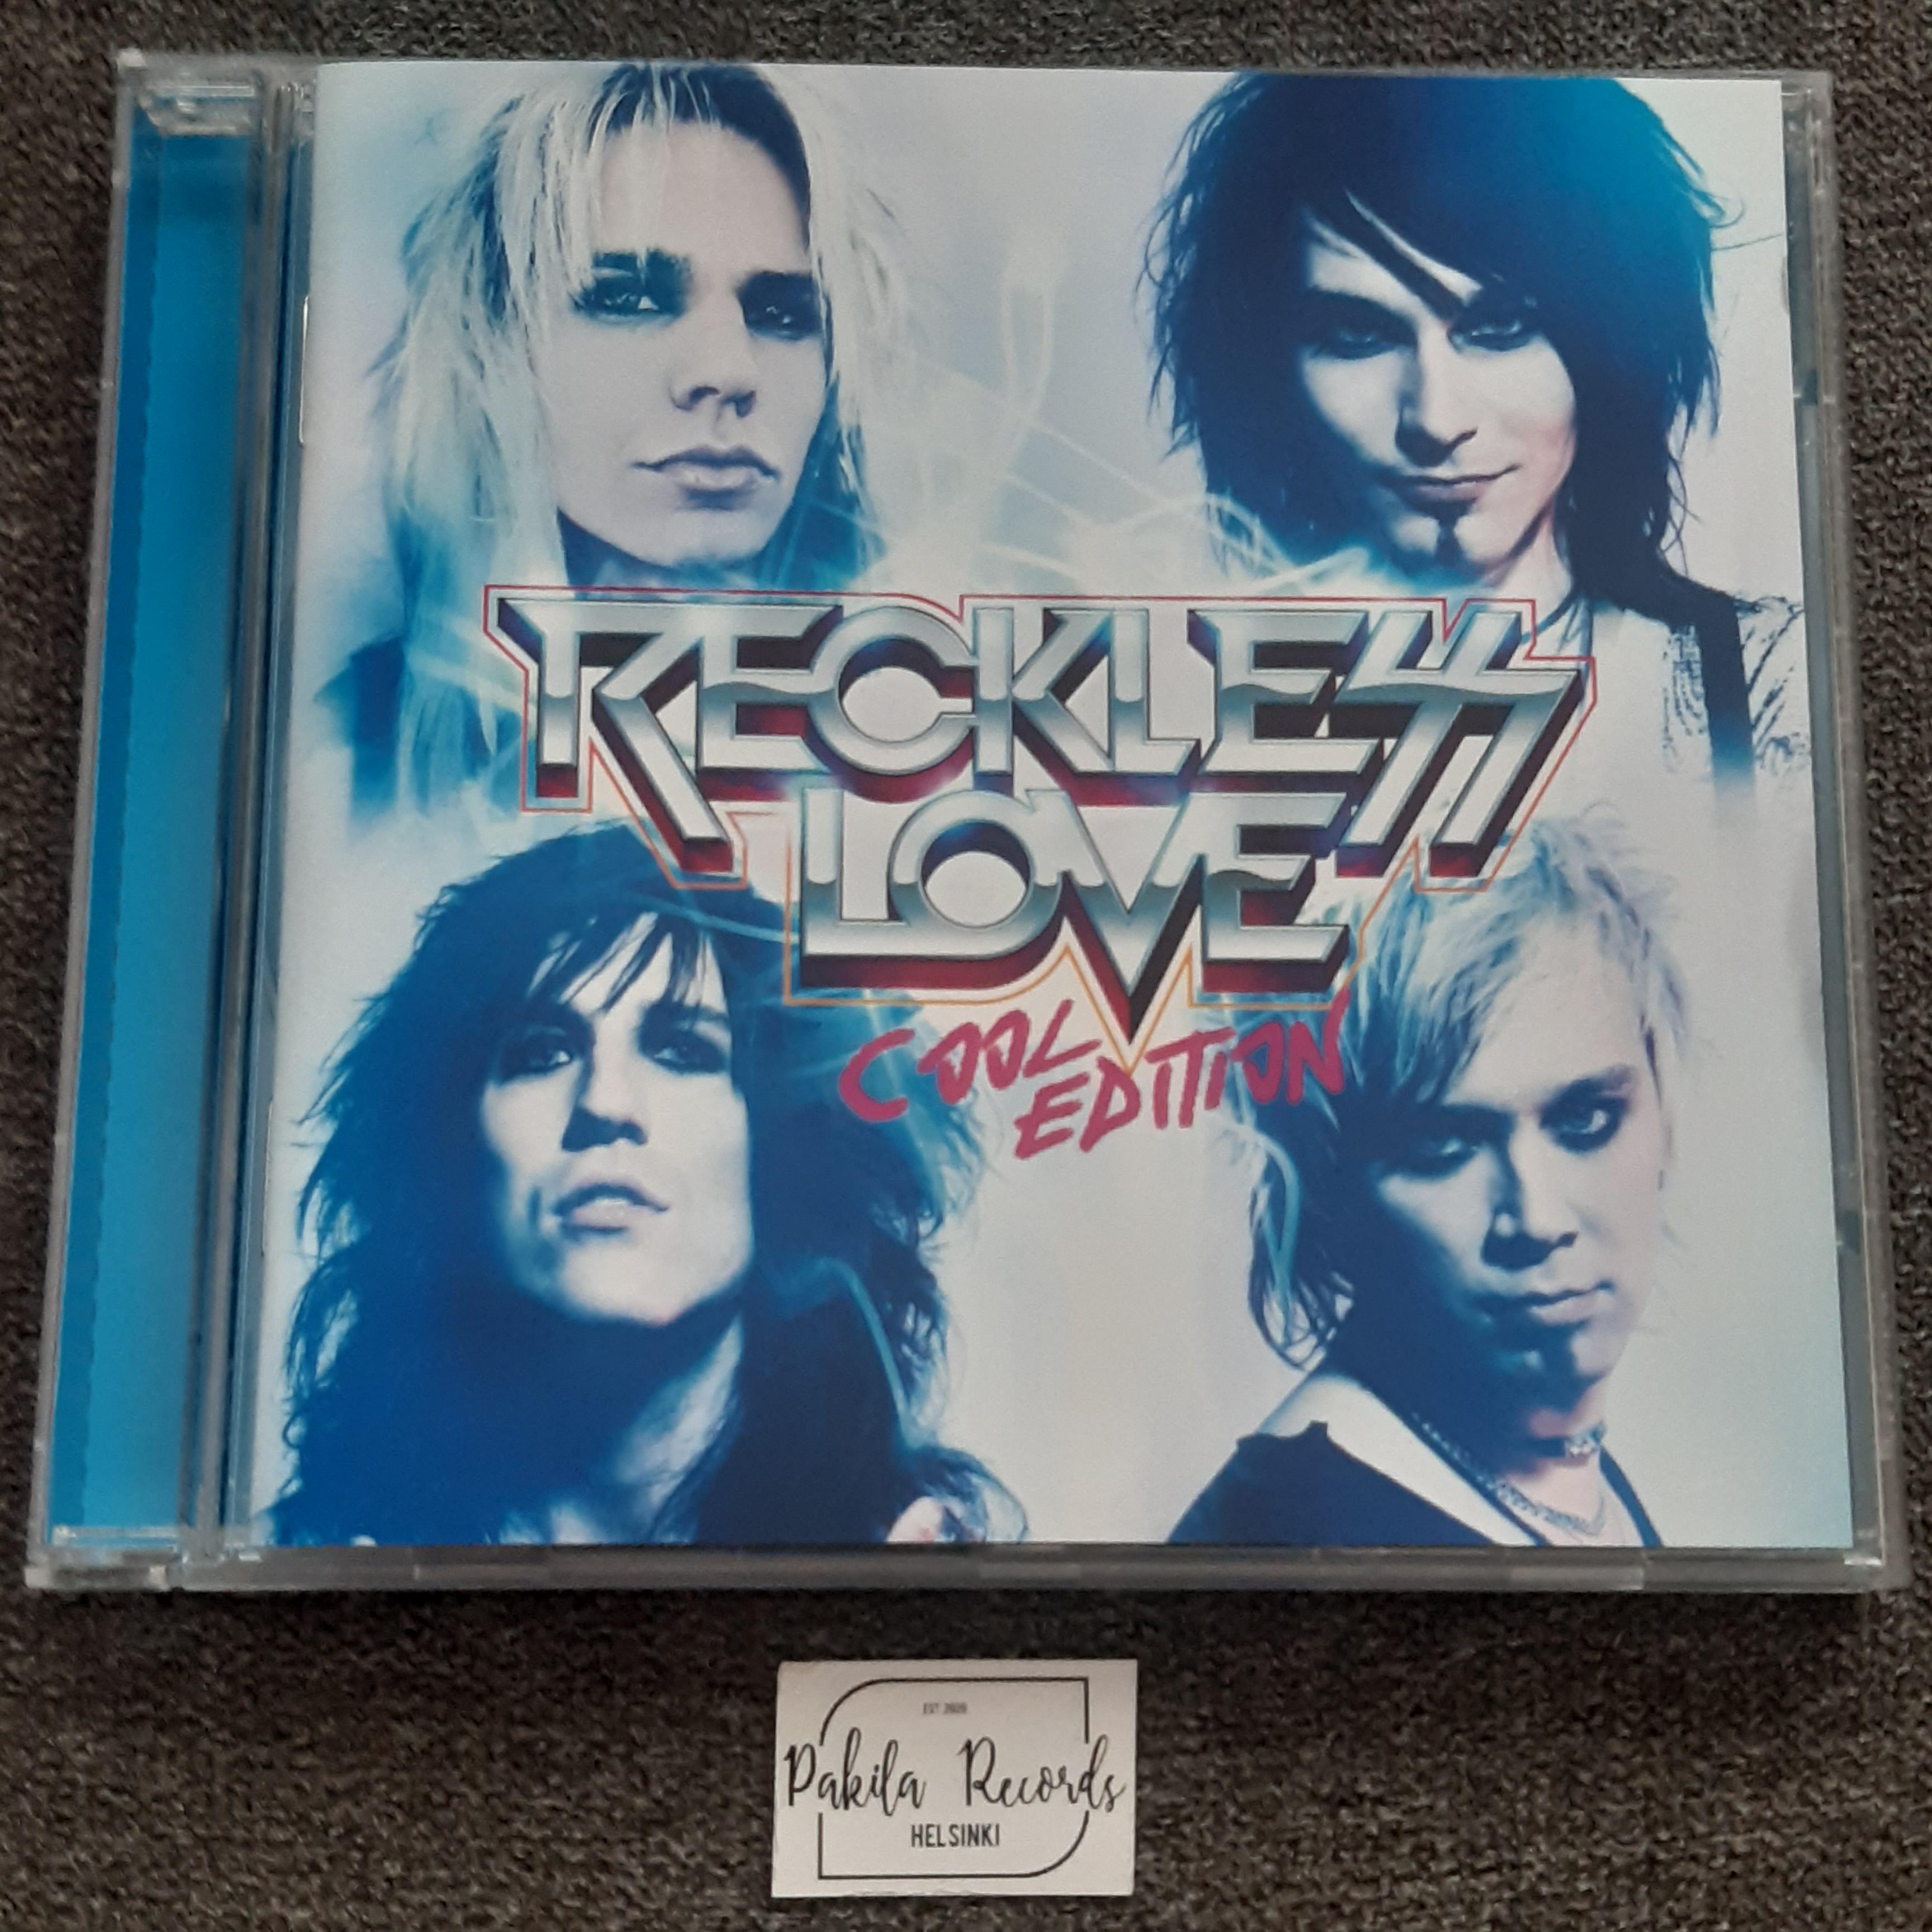 Reckless Love - Reckless Love (Cool Edition) - CD (käytetty)